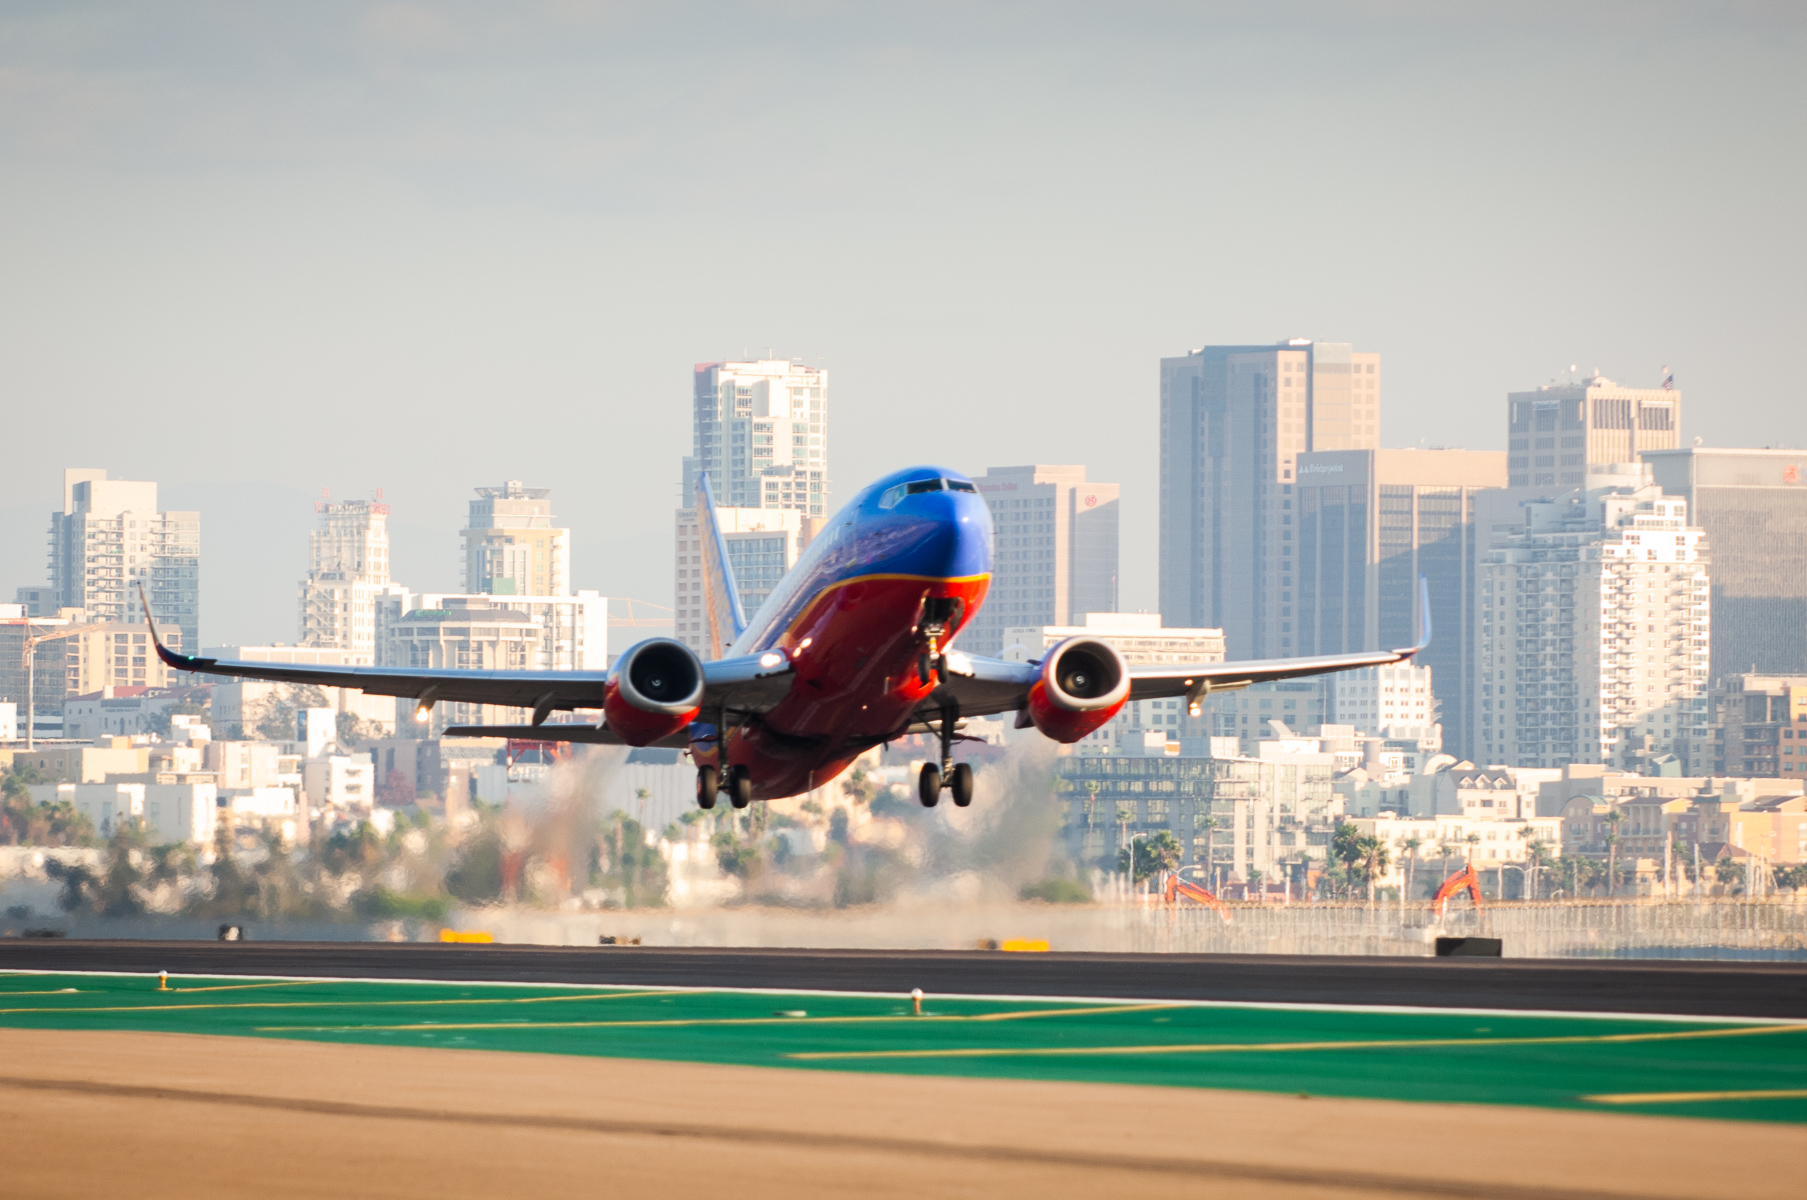 Southwest Airlines lifts off from runway